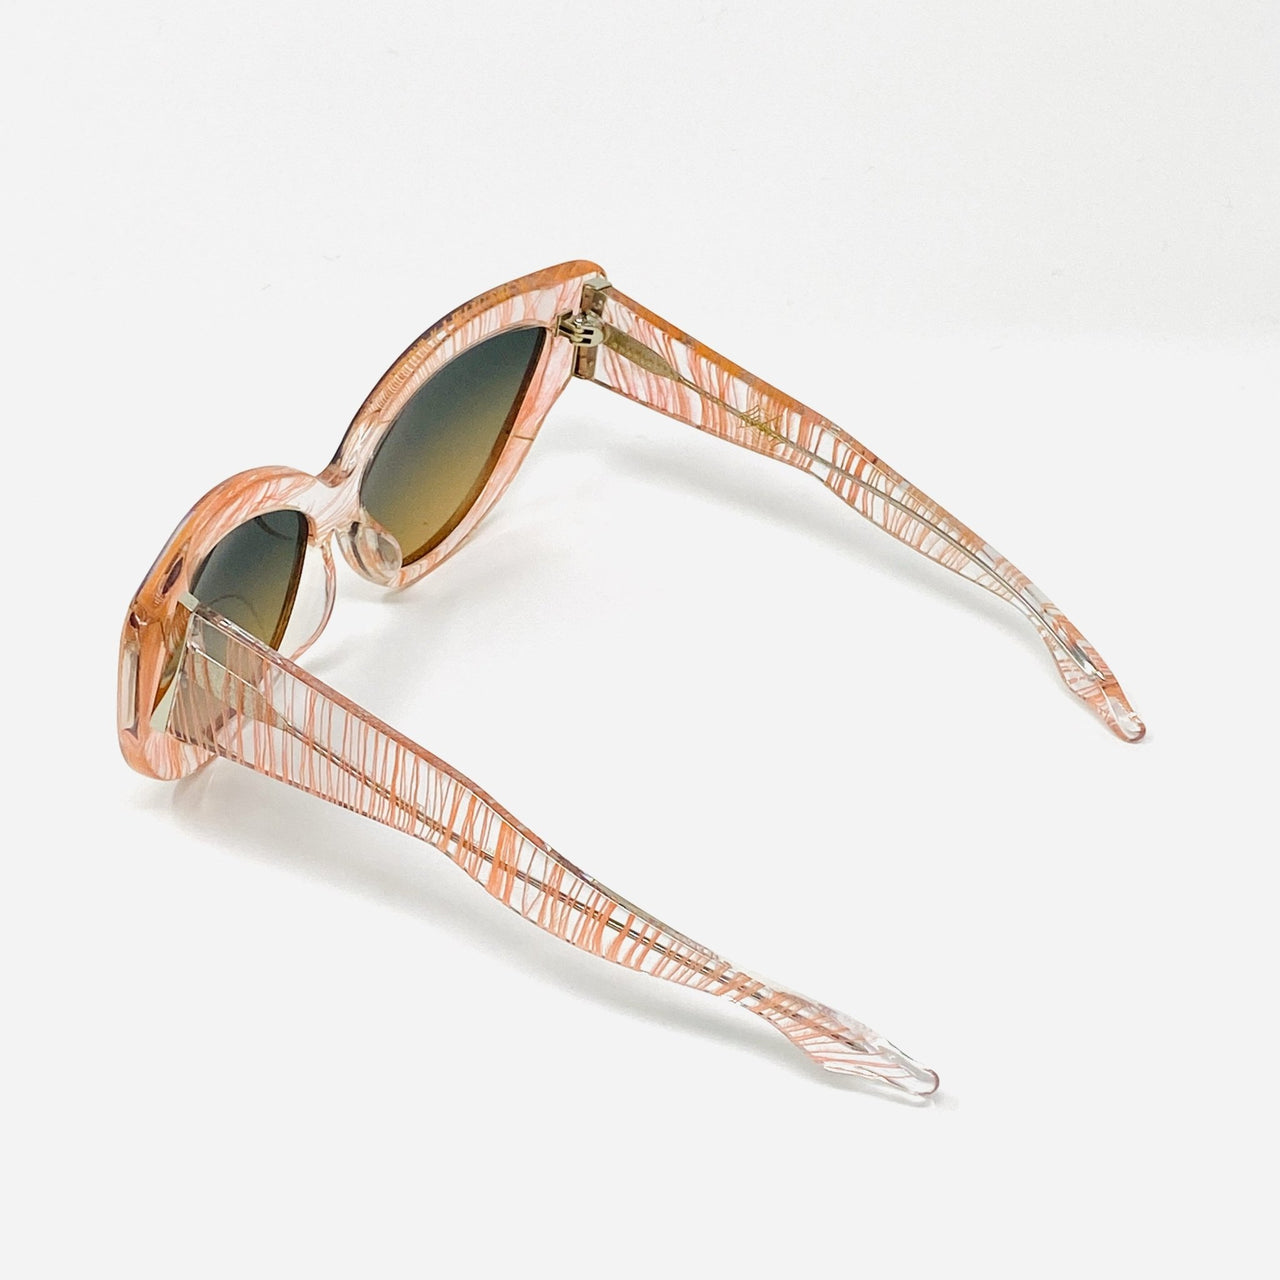 Charlotte Olympia Sunglasses Cat Eyes Orange Clear Feather CO1C4SUN - Watches & Crystals